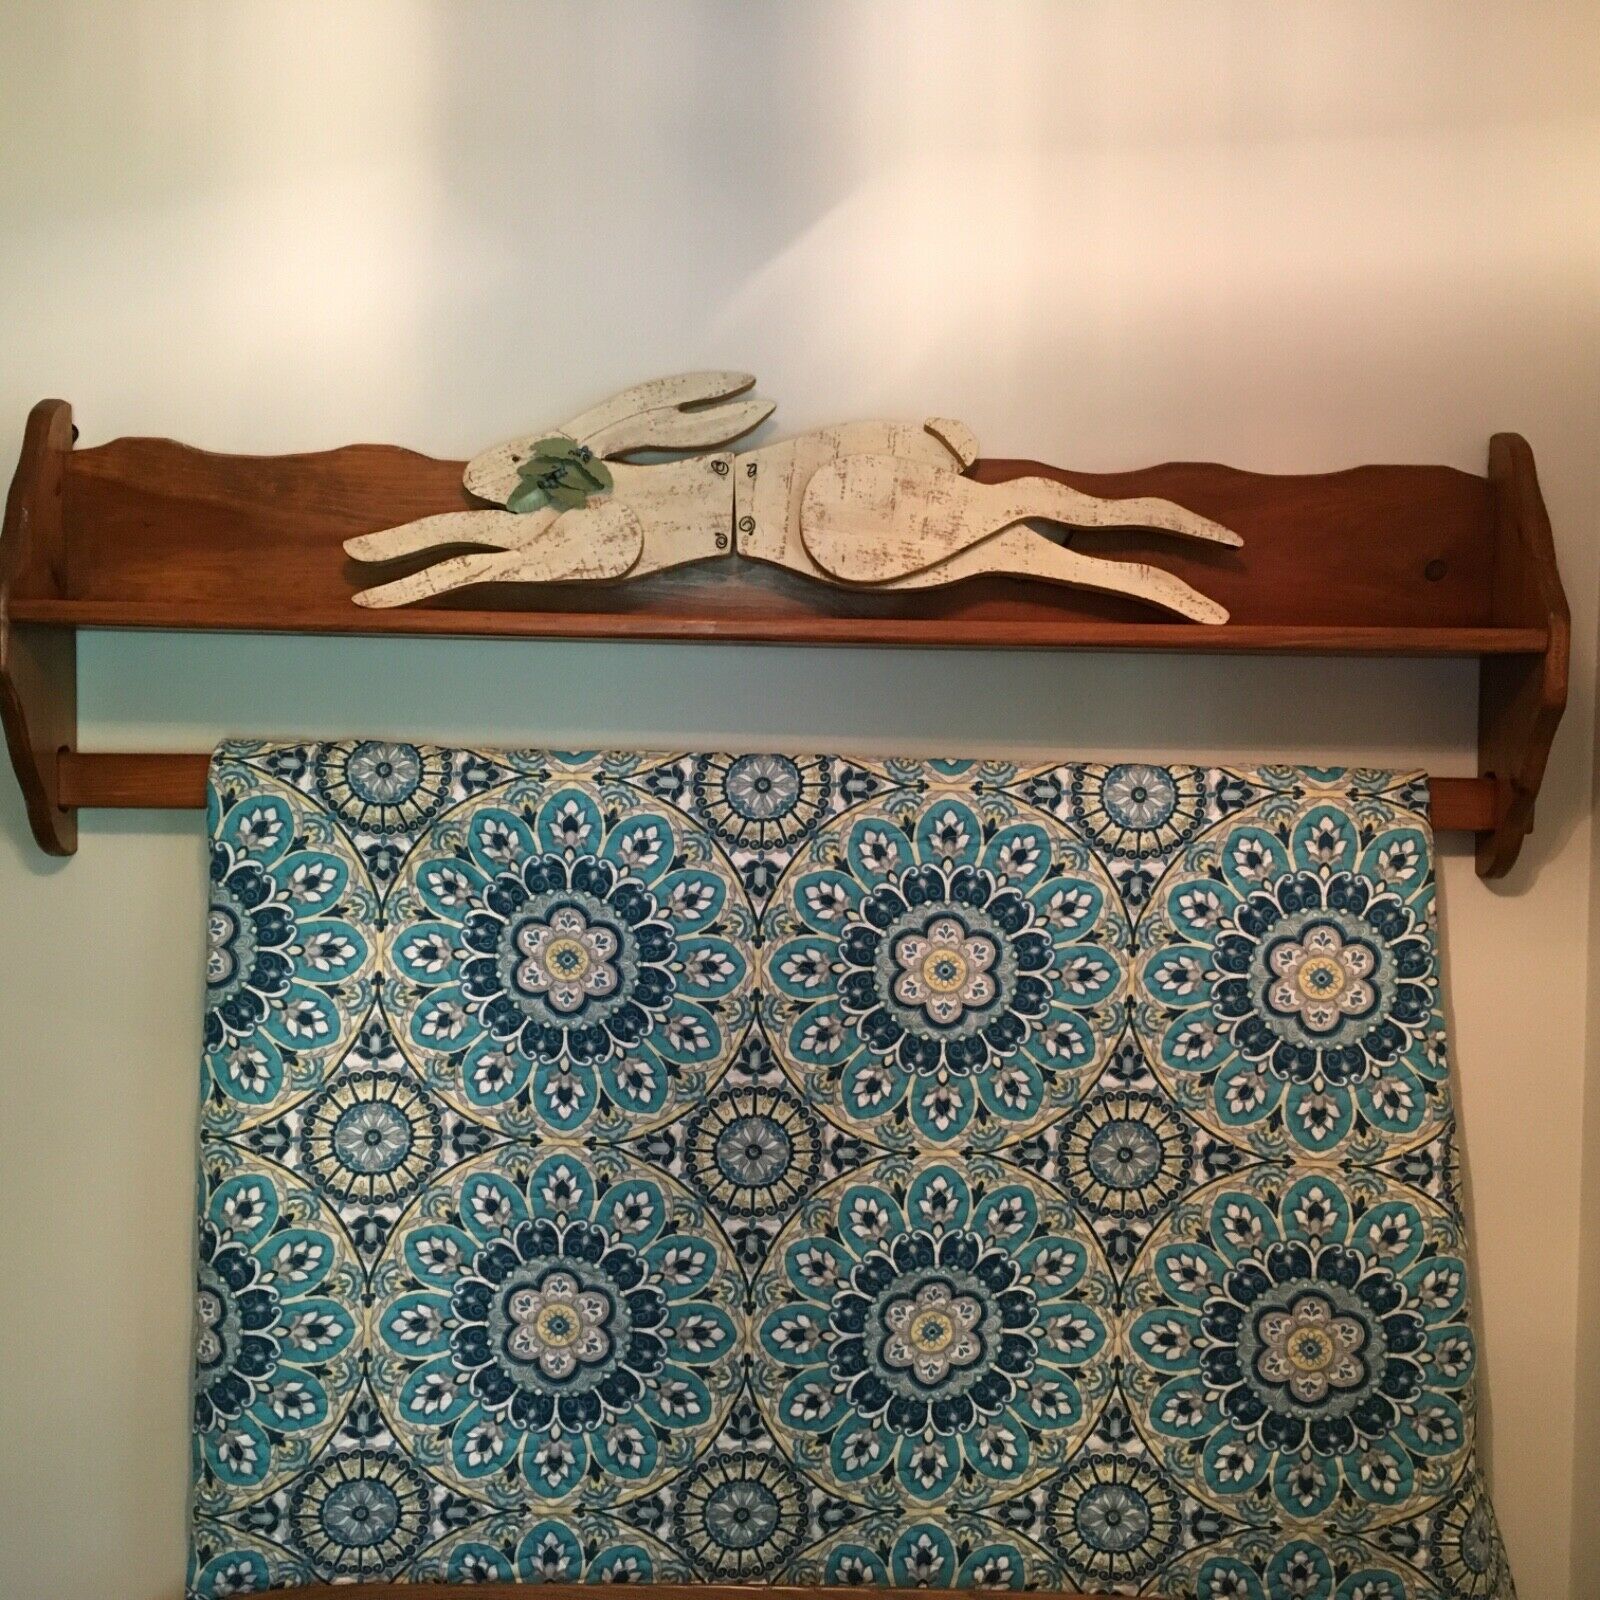 Wall Quilt Blanket Rack W/shelf Wood Hand Crafted Euc Amish Primitive